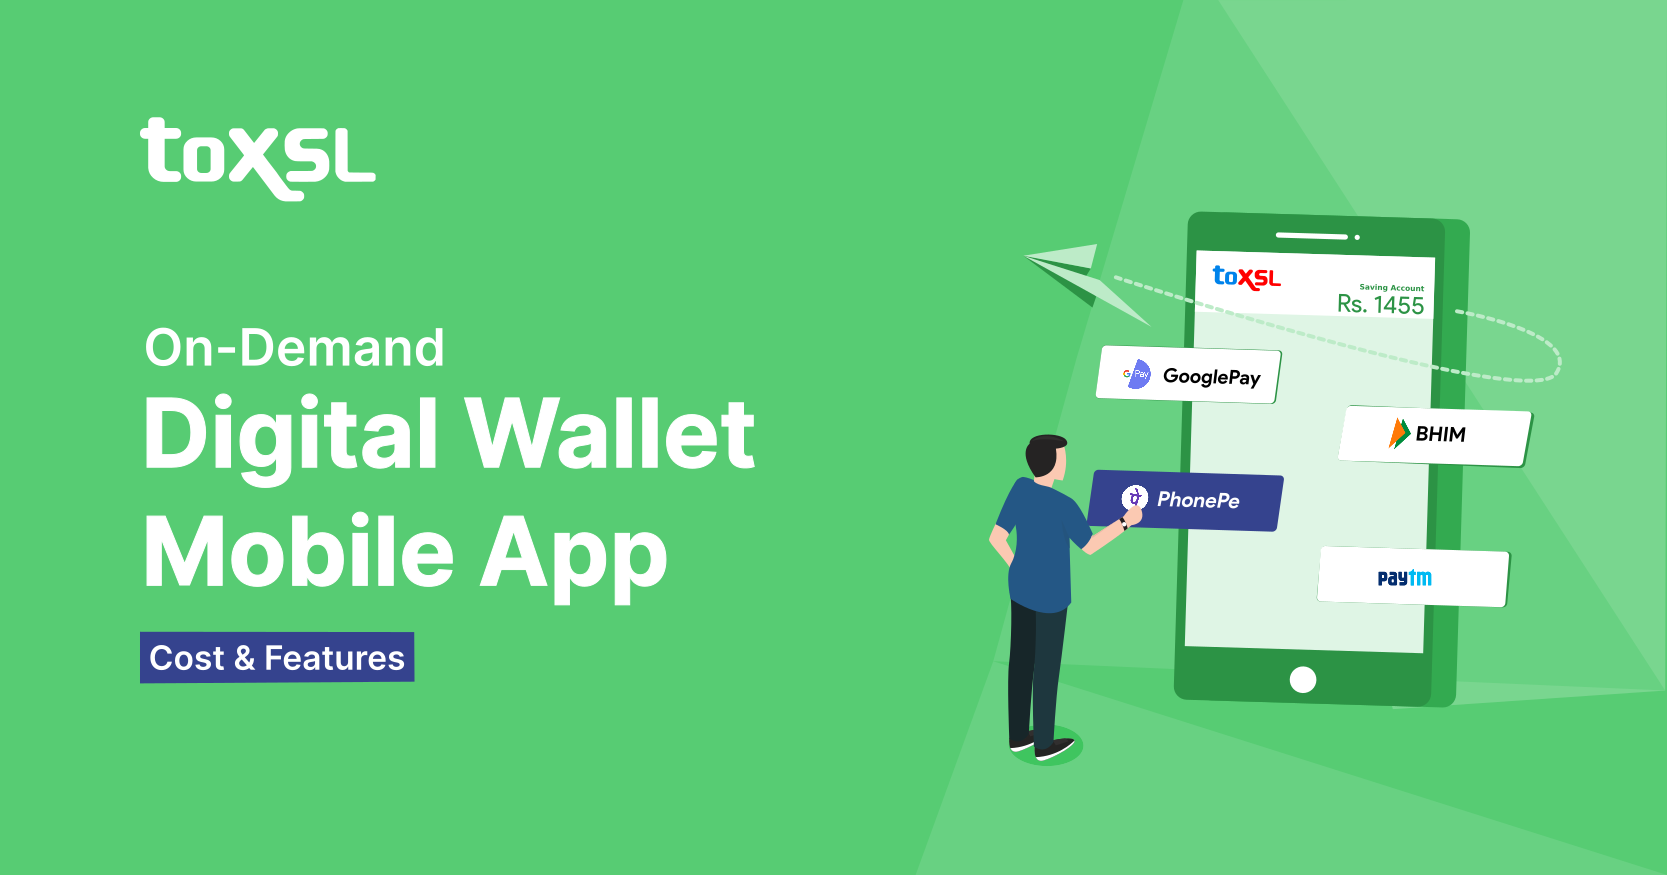 Key Features and Cost to Develop Digital Wallet Mobile App